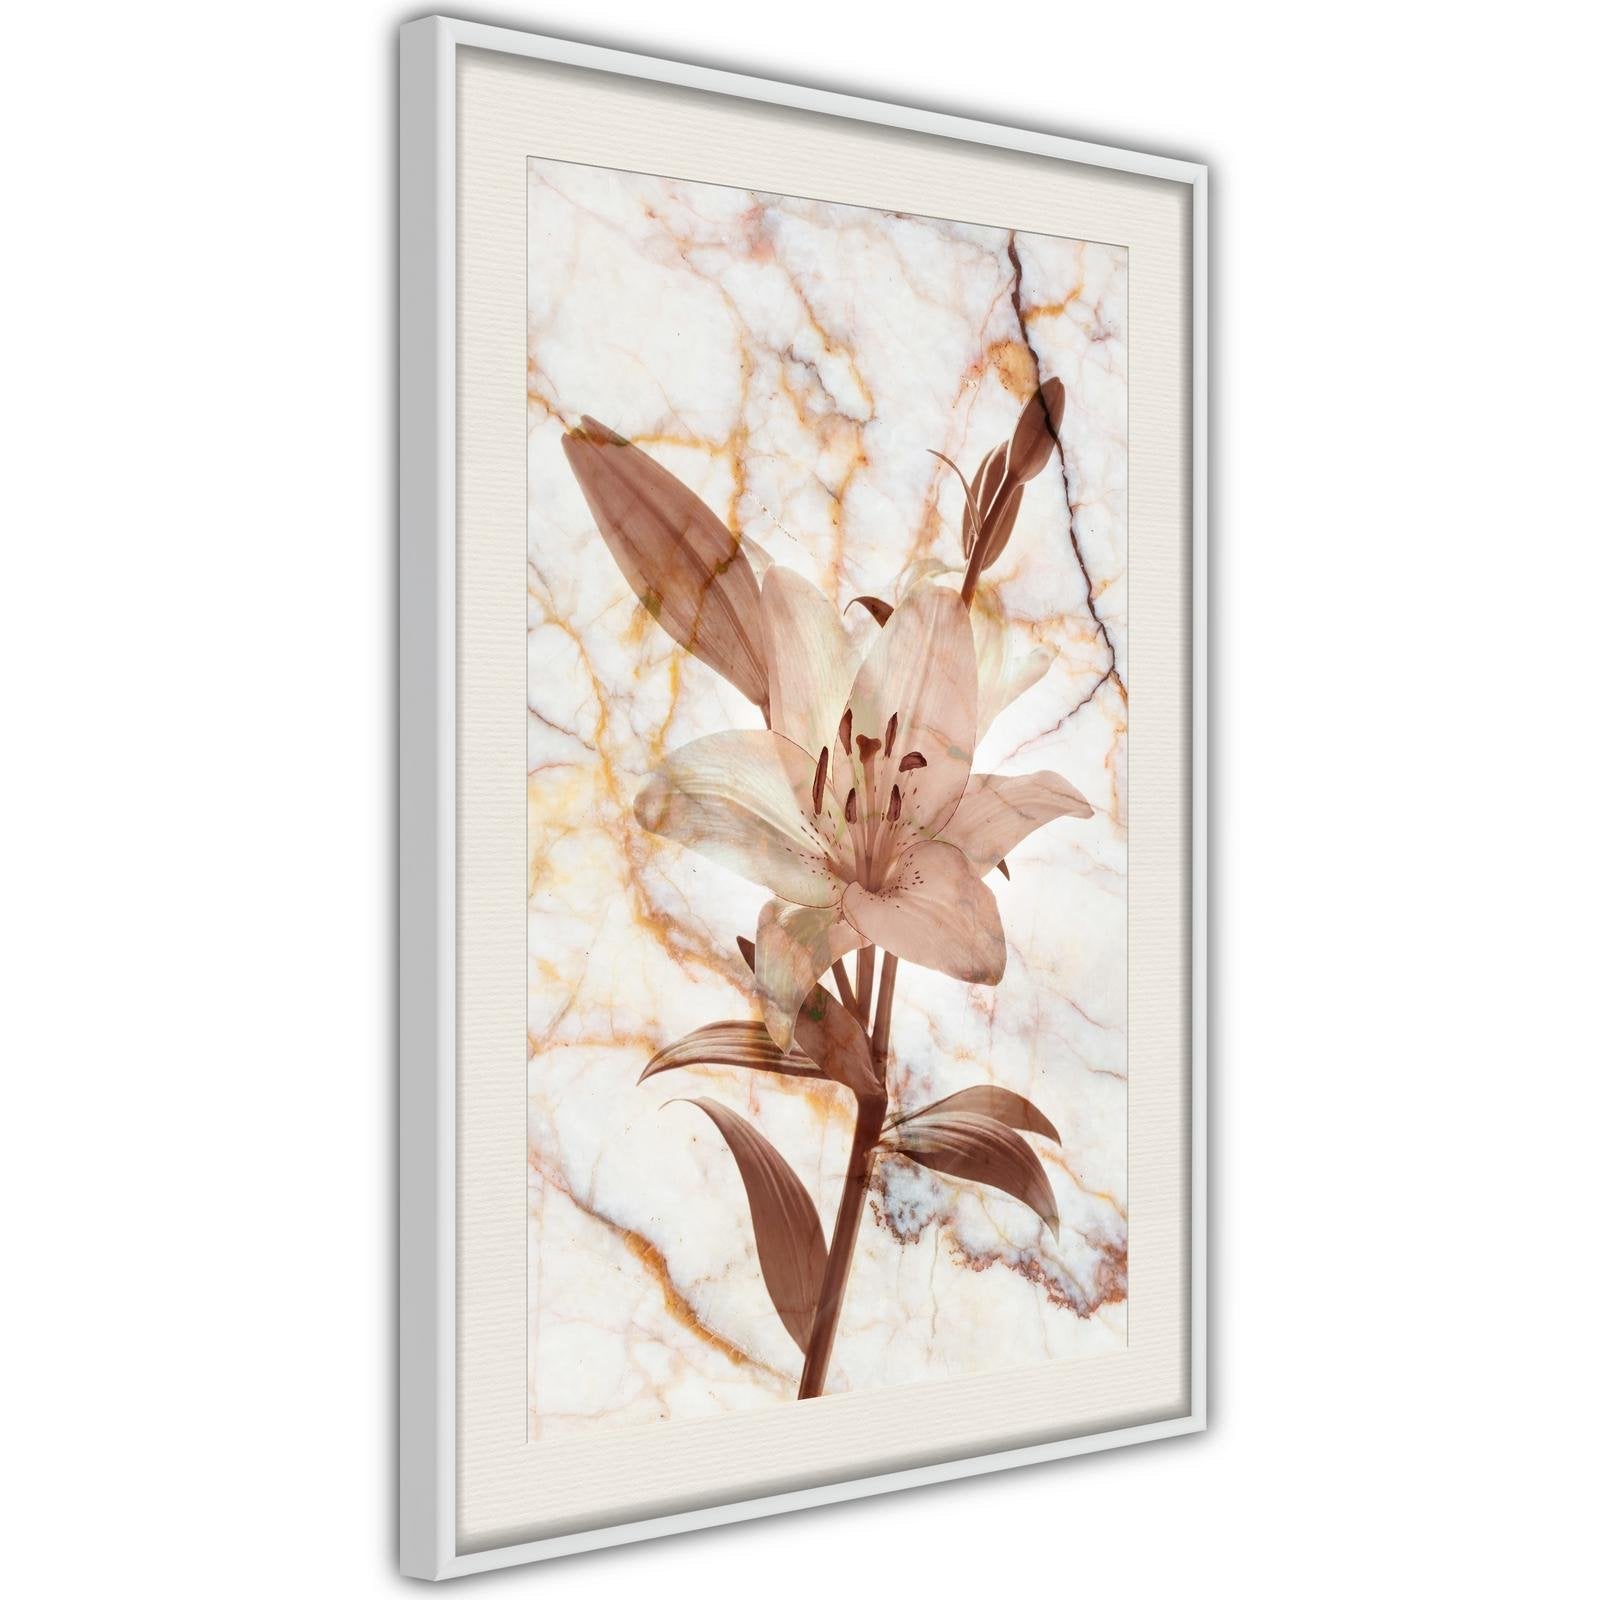 Inramad Poster / Tavla - Lily on Marble Background-Poster Inramad-Artgeist-peaceofhome.se